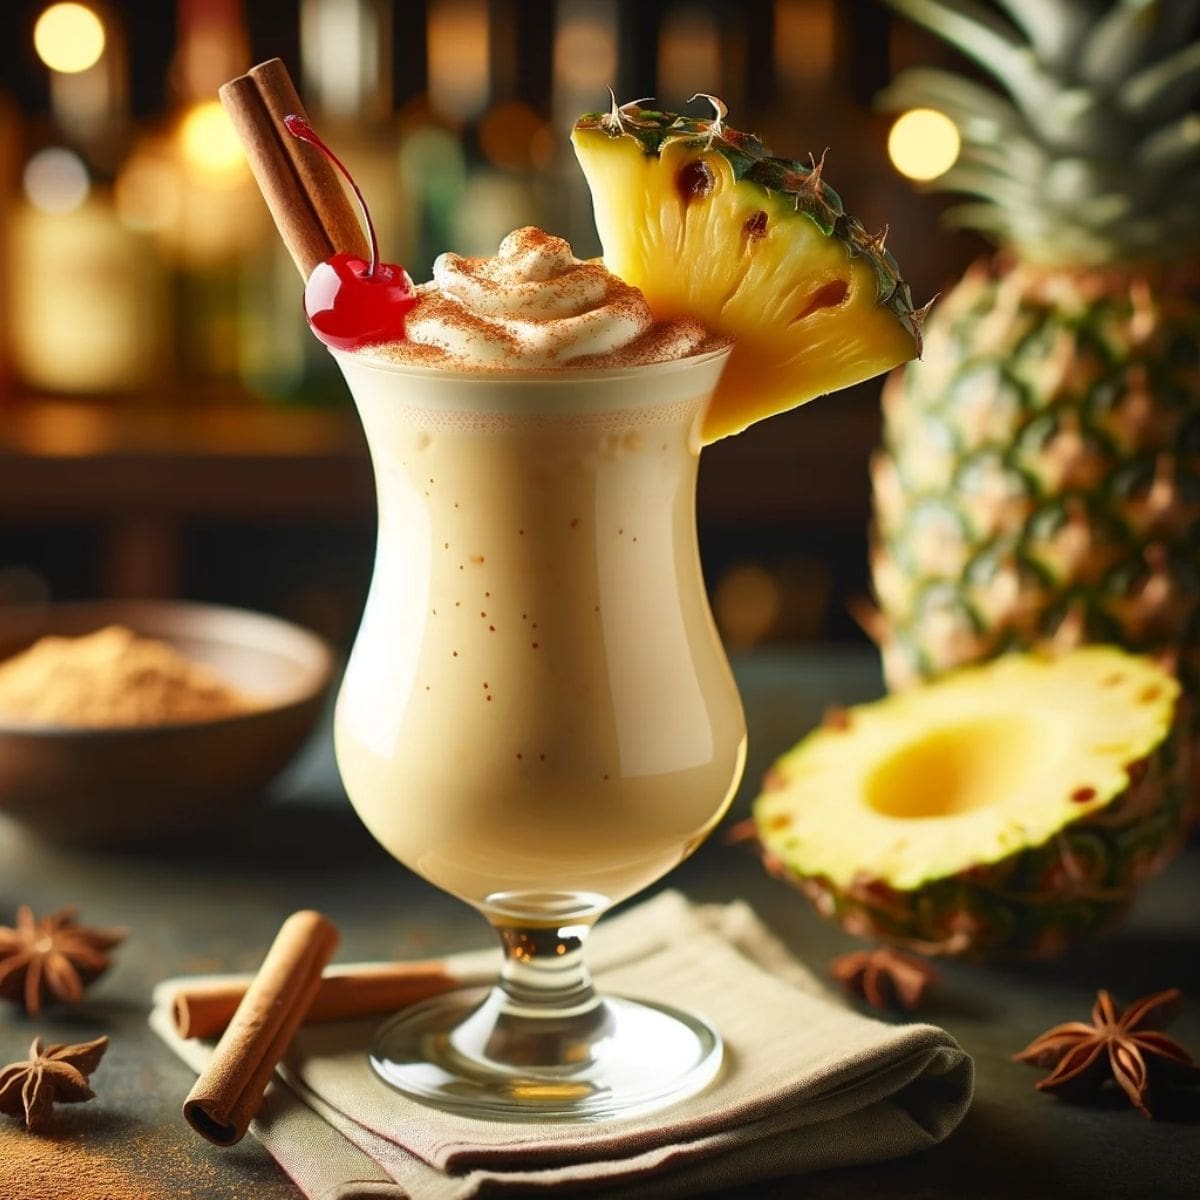 Spiced Rum Painkiller Recipe: A Tropical Cocktail Guide